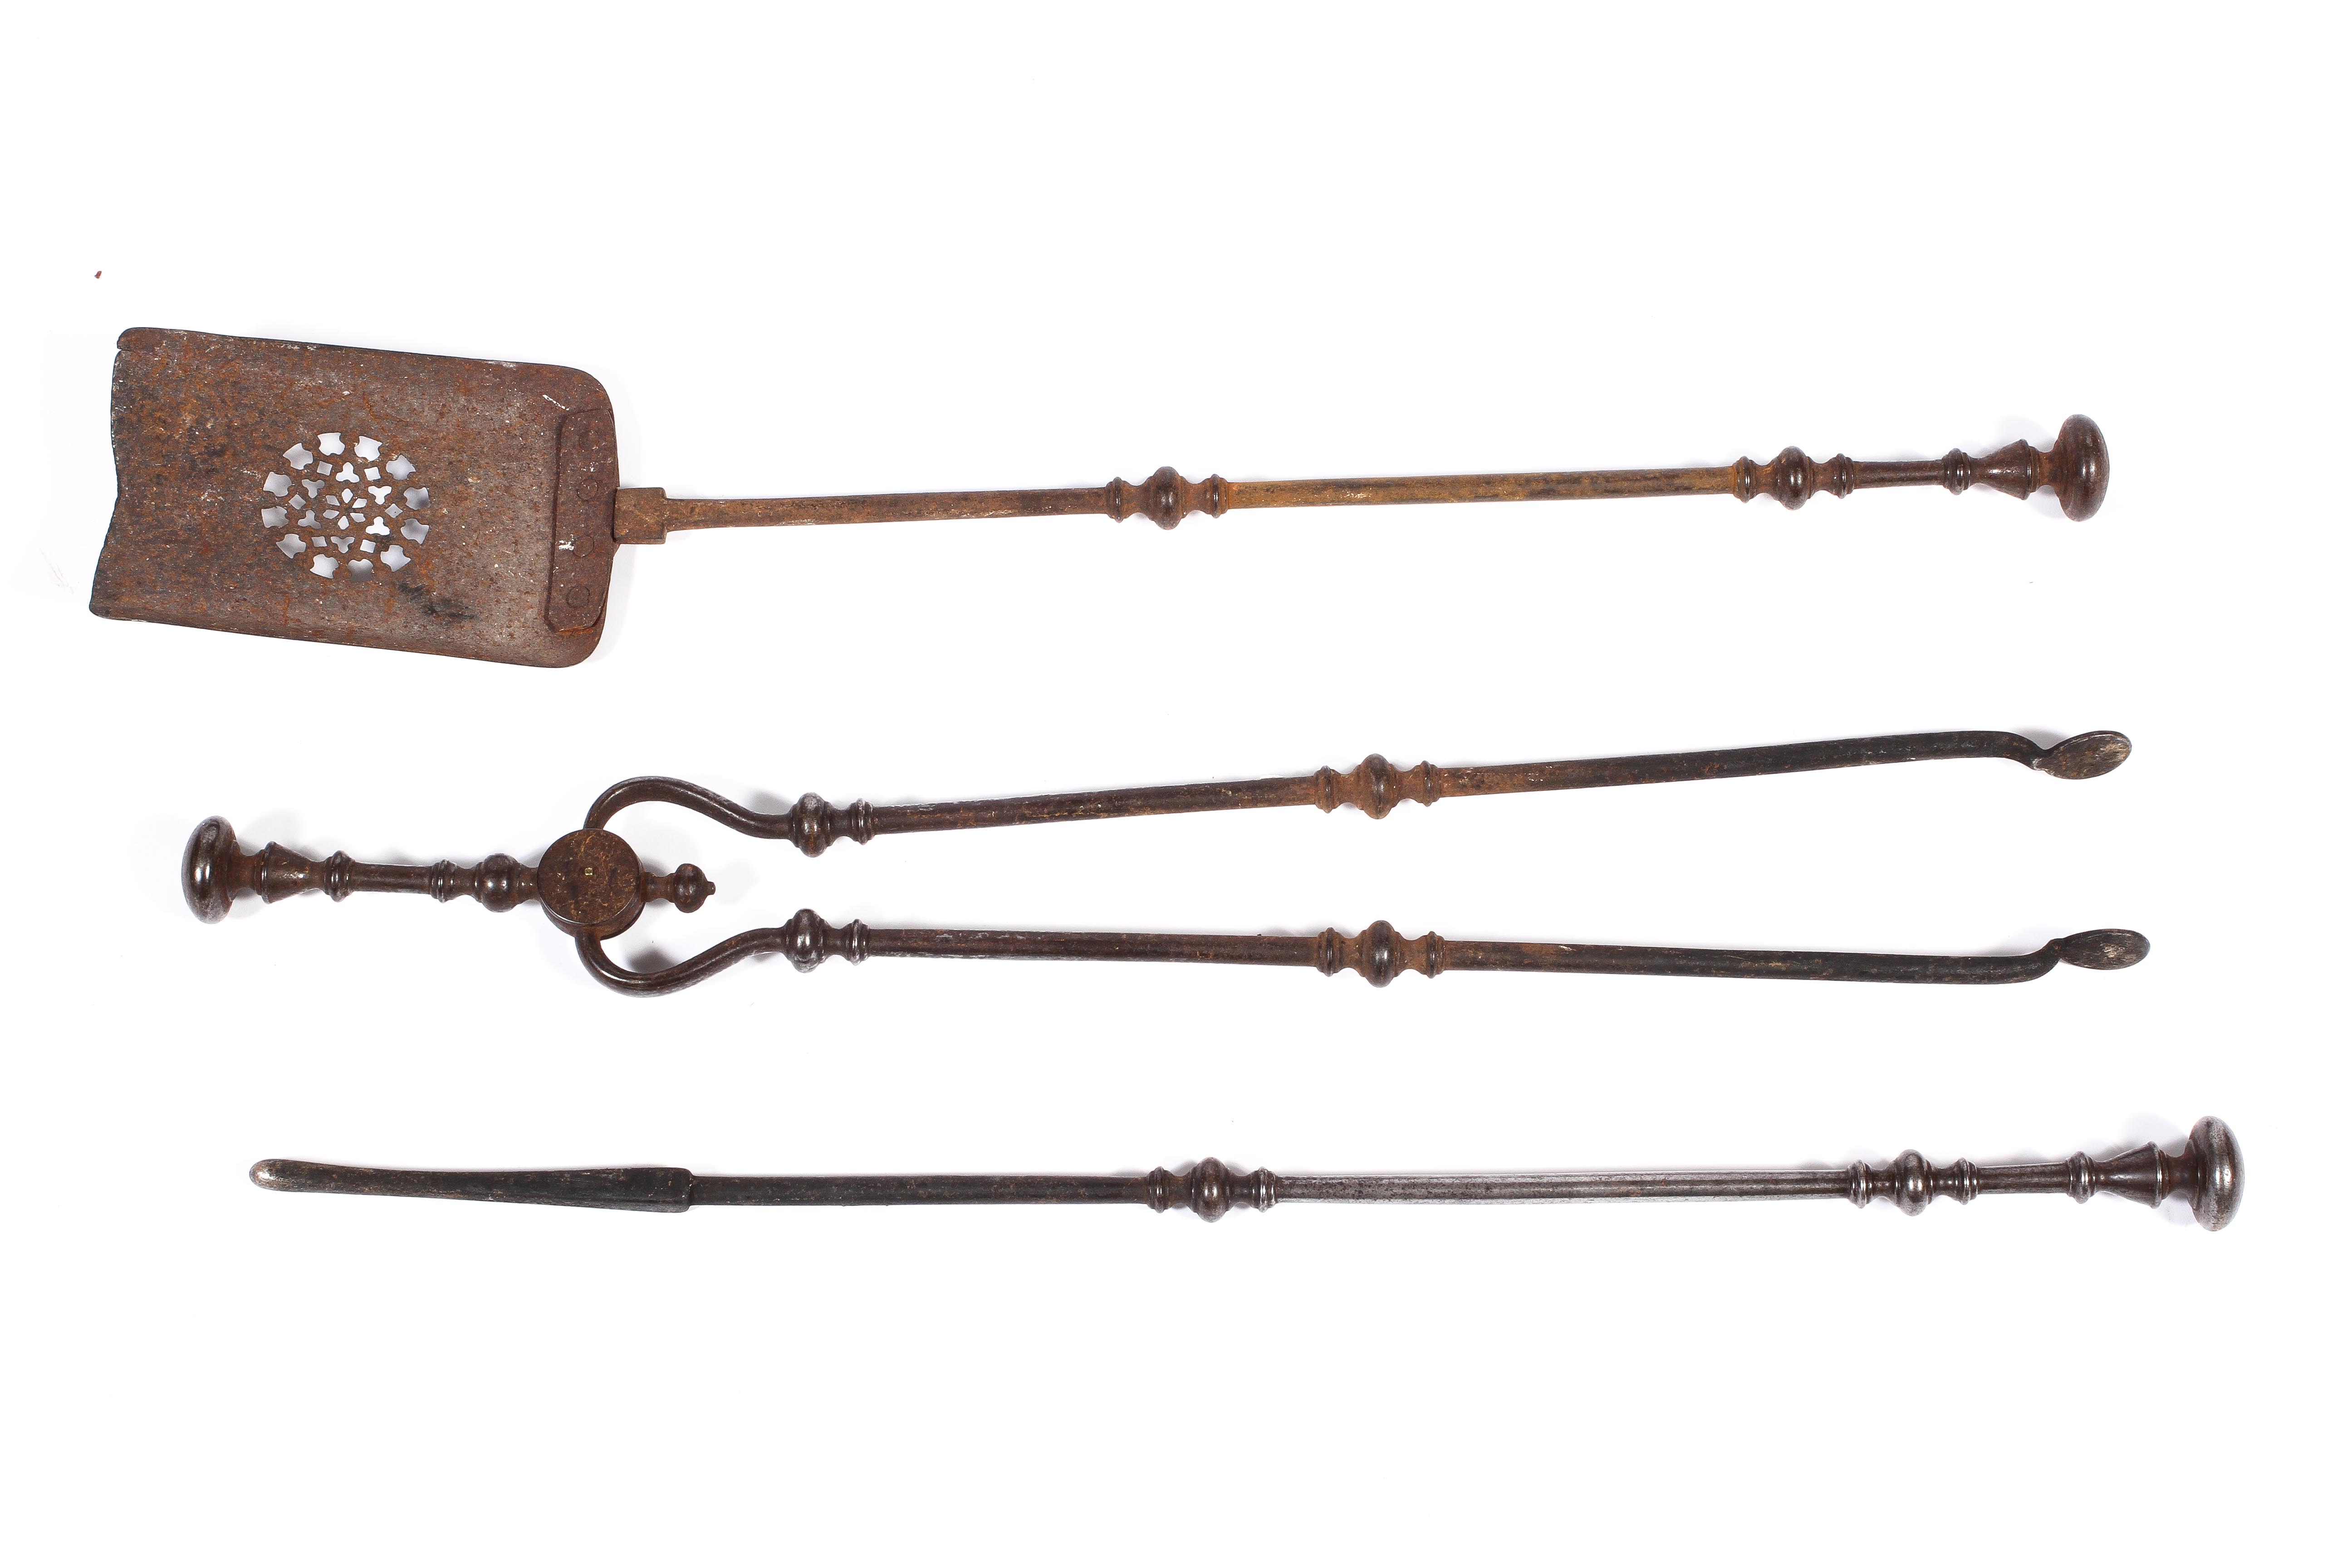 A set of Georgian steel fire tools, comprising: a poker, tongs and a shovel, with knopped handles,